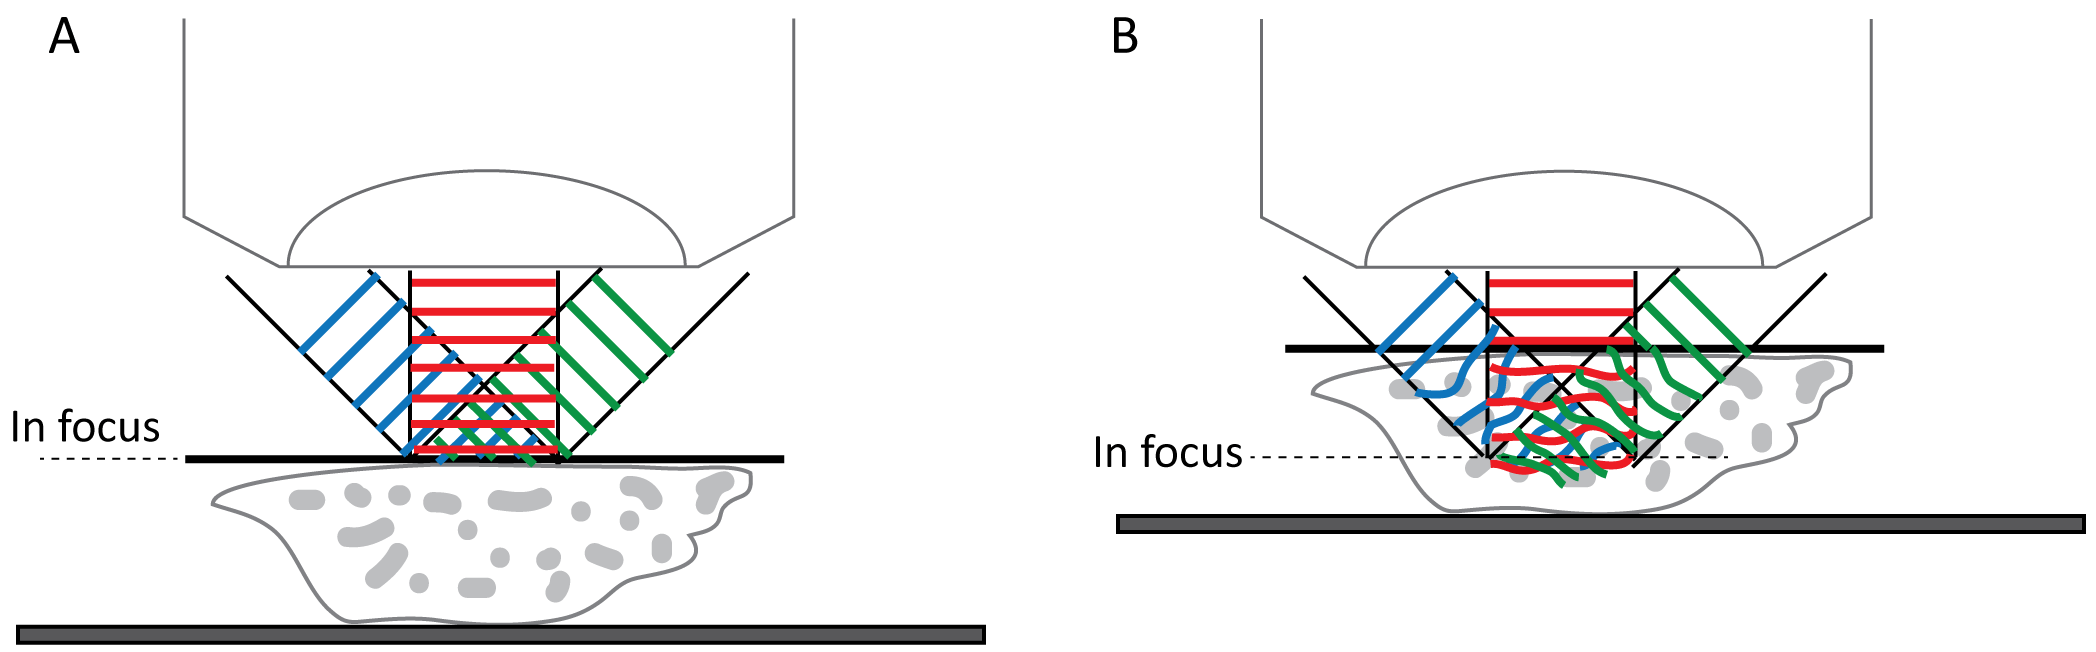 Figure 1. (A) Depiction of the ideal condition for producing interference fringes of the highest contrast in which the troughs of the fringes have zero intensity. Note that the three beams are nearly perfect plane waves and all s-polarized. (B) After the beams travel into the sample, the plane waves experience changes to their wavefronts and polarization state because of the inhomogeneity of the sample.